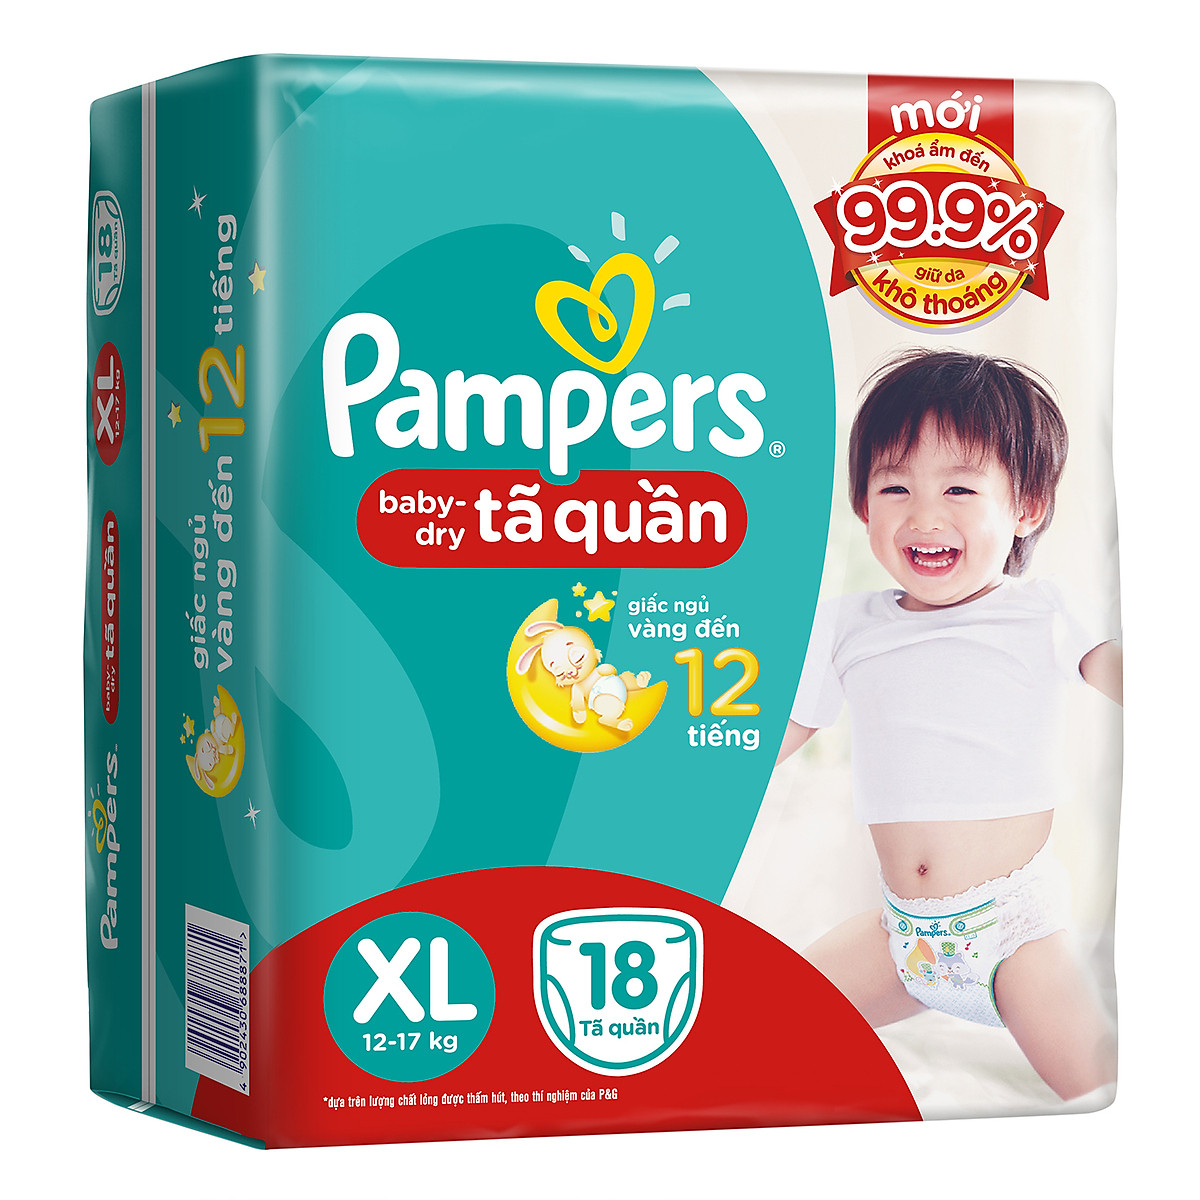 Pampers All round Protection Pants, Large size baby diapers (LG) - Haim